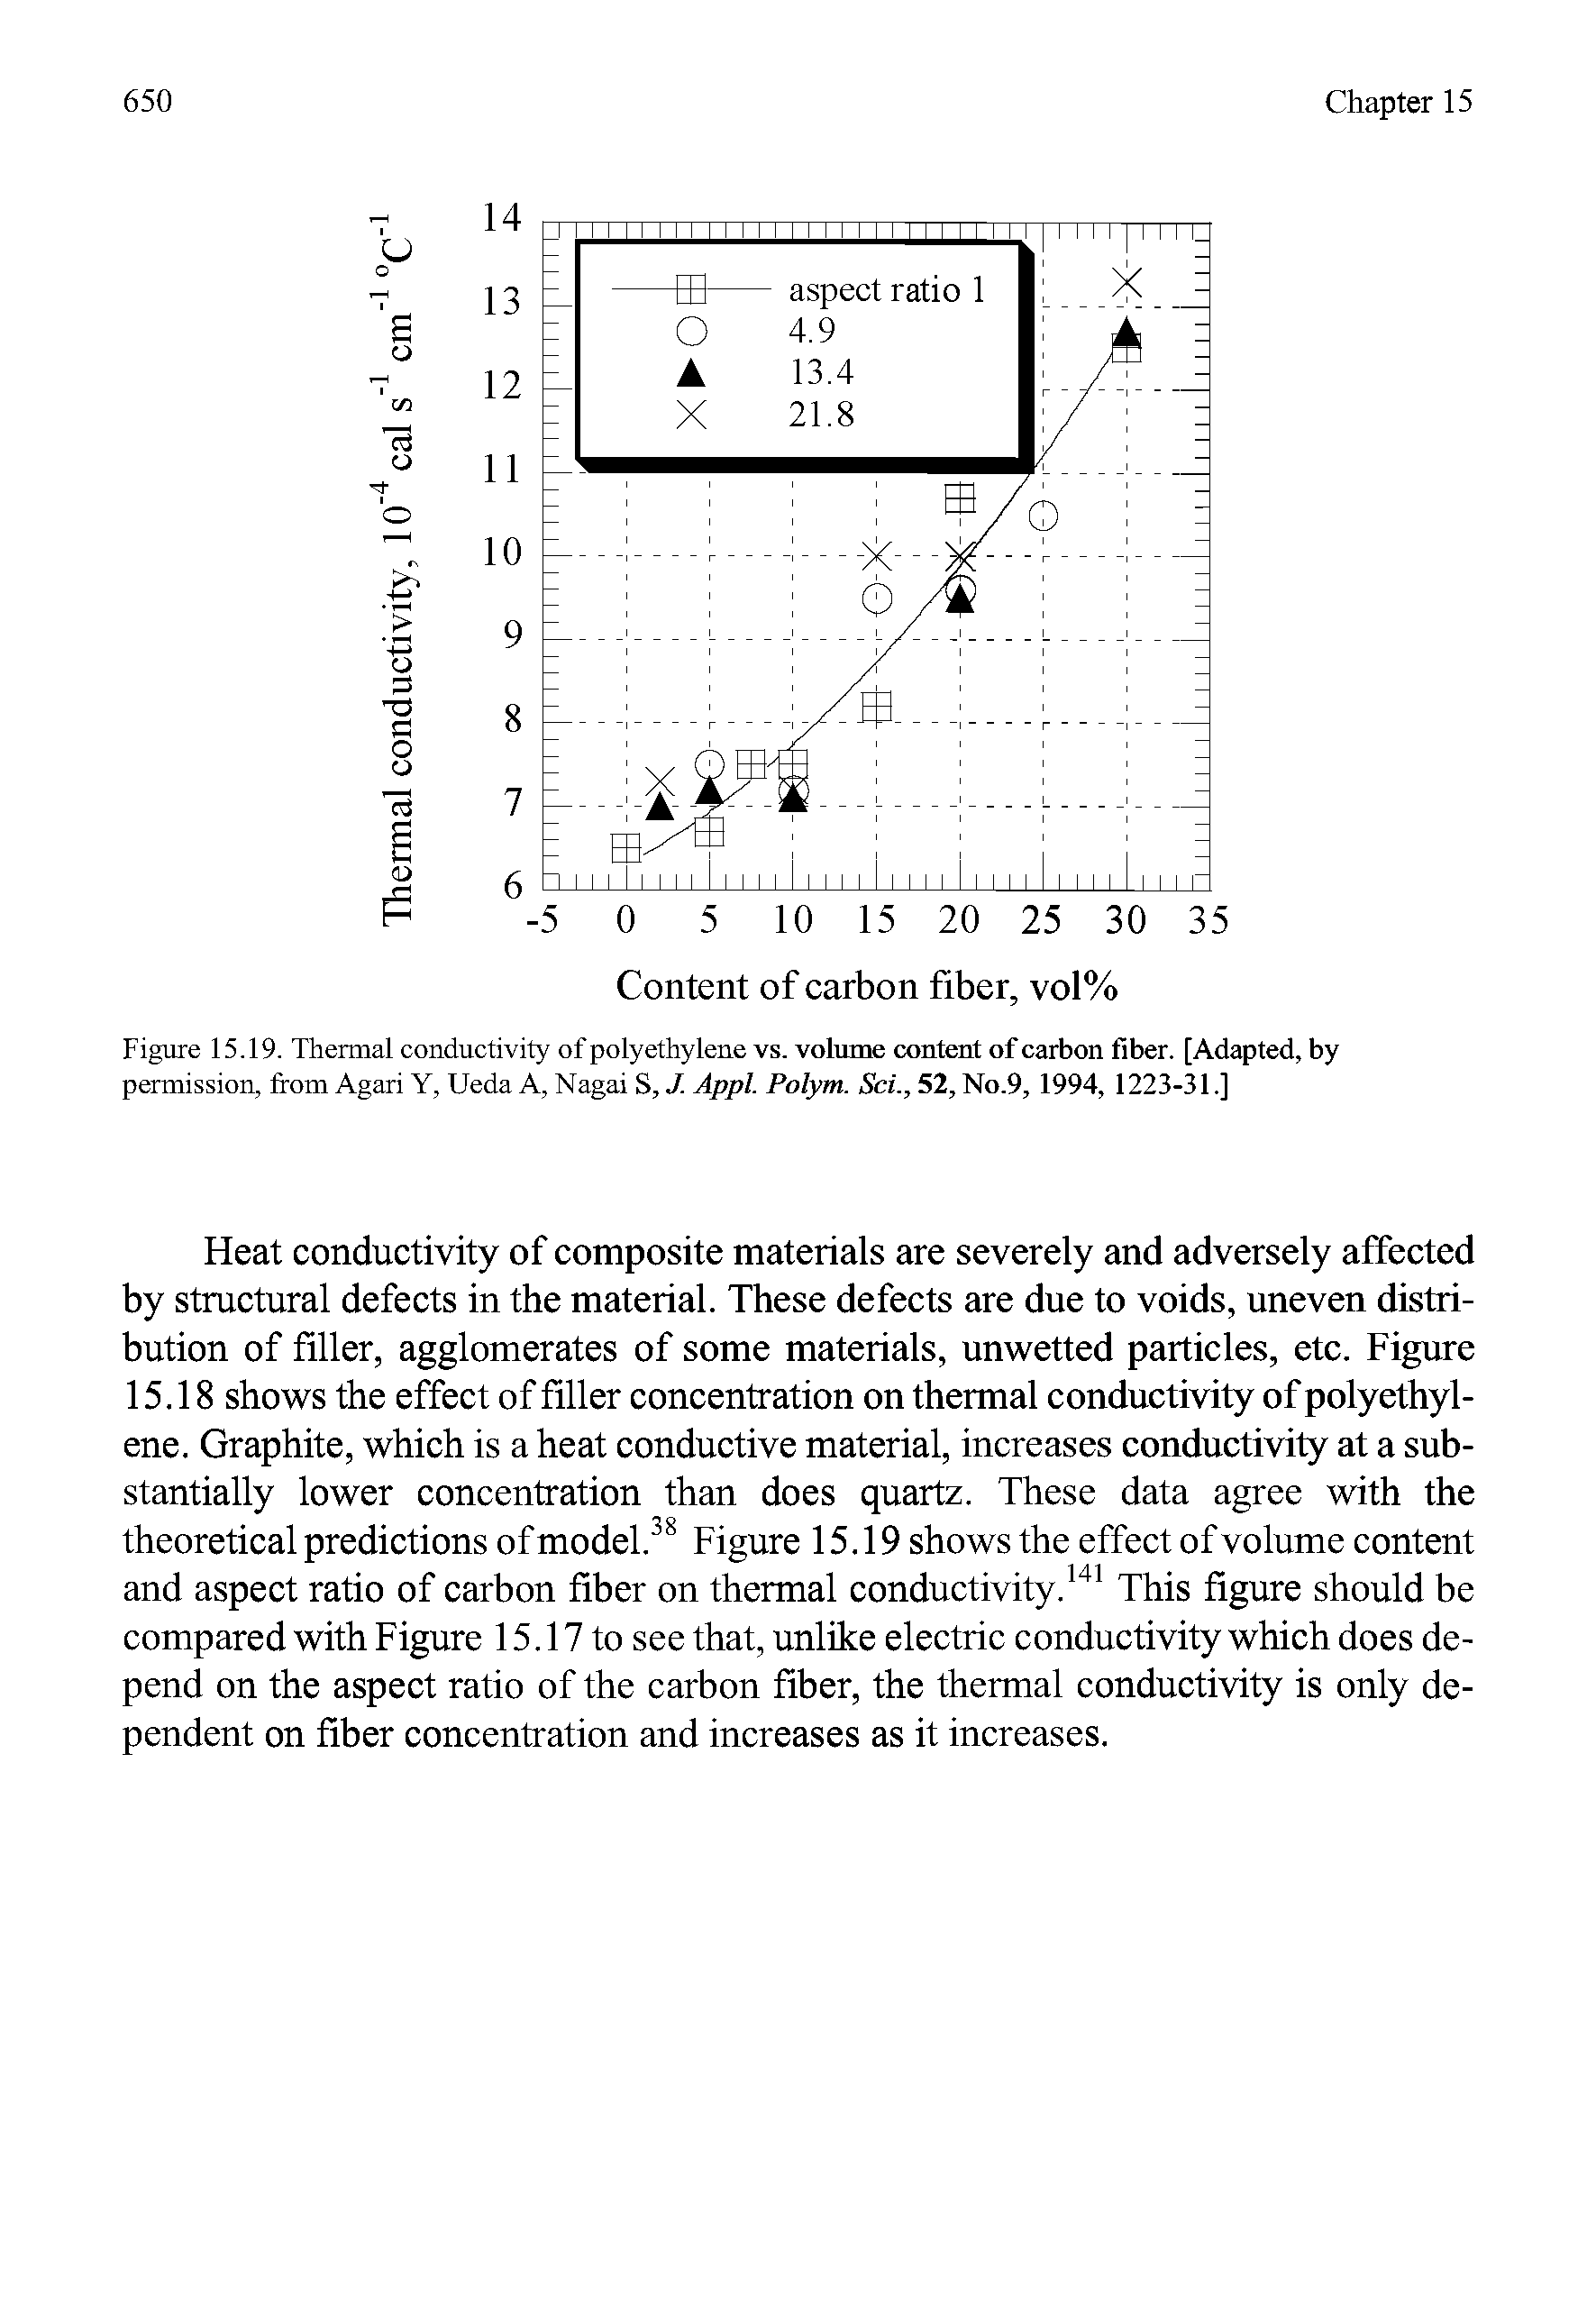 Figure 15.19. Thennal conductivity of polyethylene vs. volume content of carbon fiber. [Adapted, by permission, from Agari Y, Ueda A, Nagai S, J. Appl. Polym. Sci., 52, No.9, 1994, 1223-31.]...